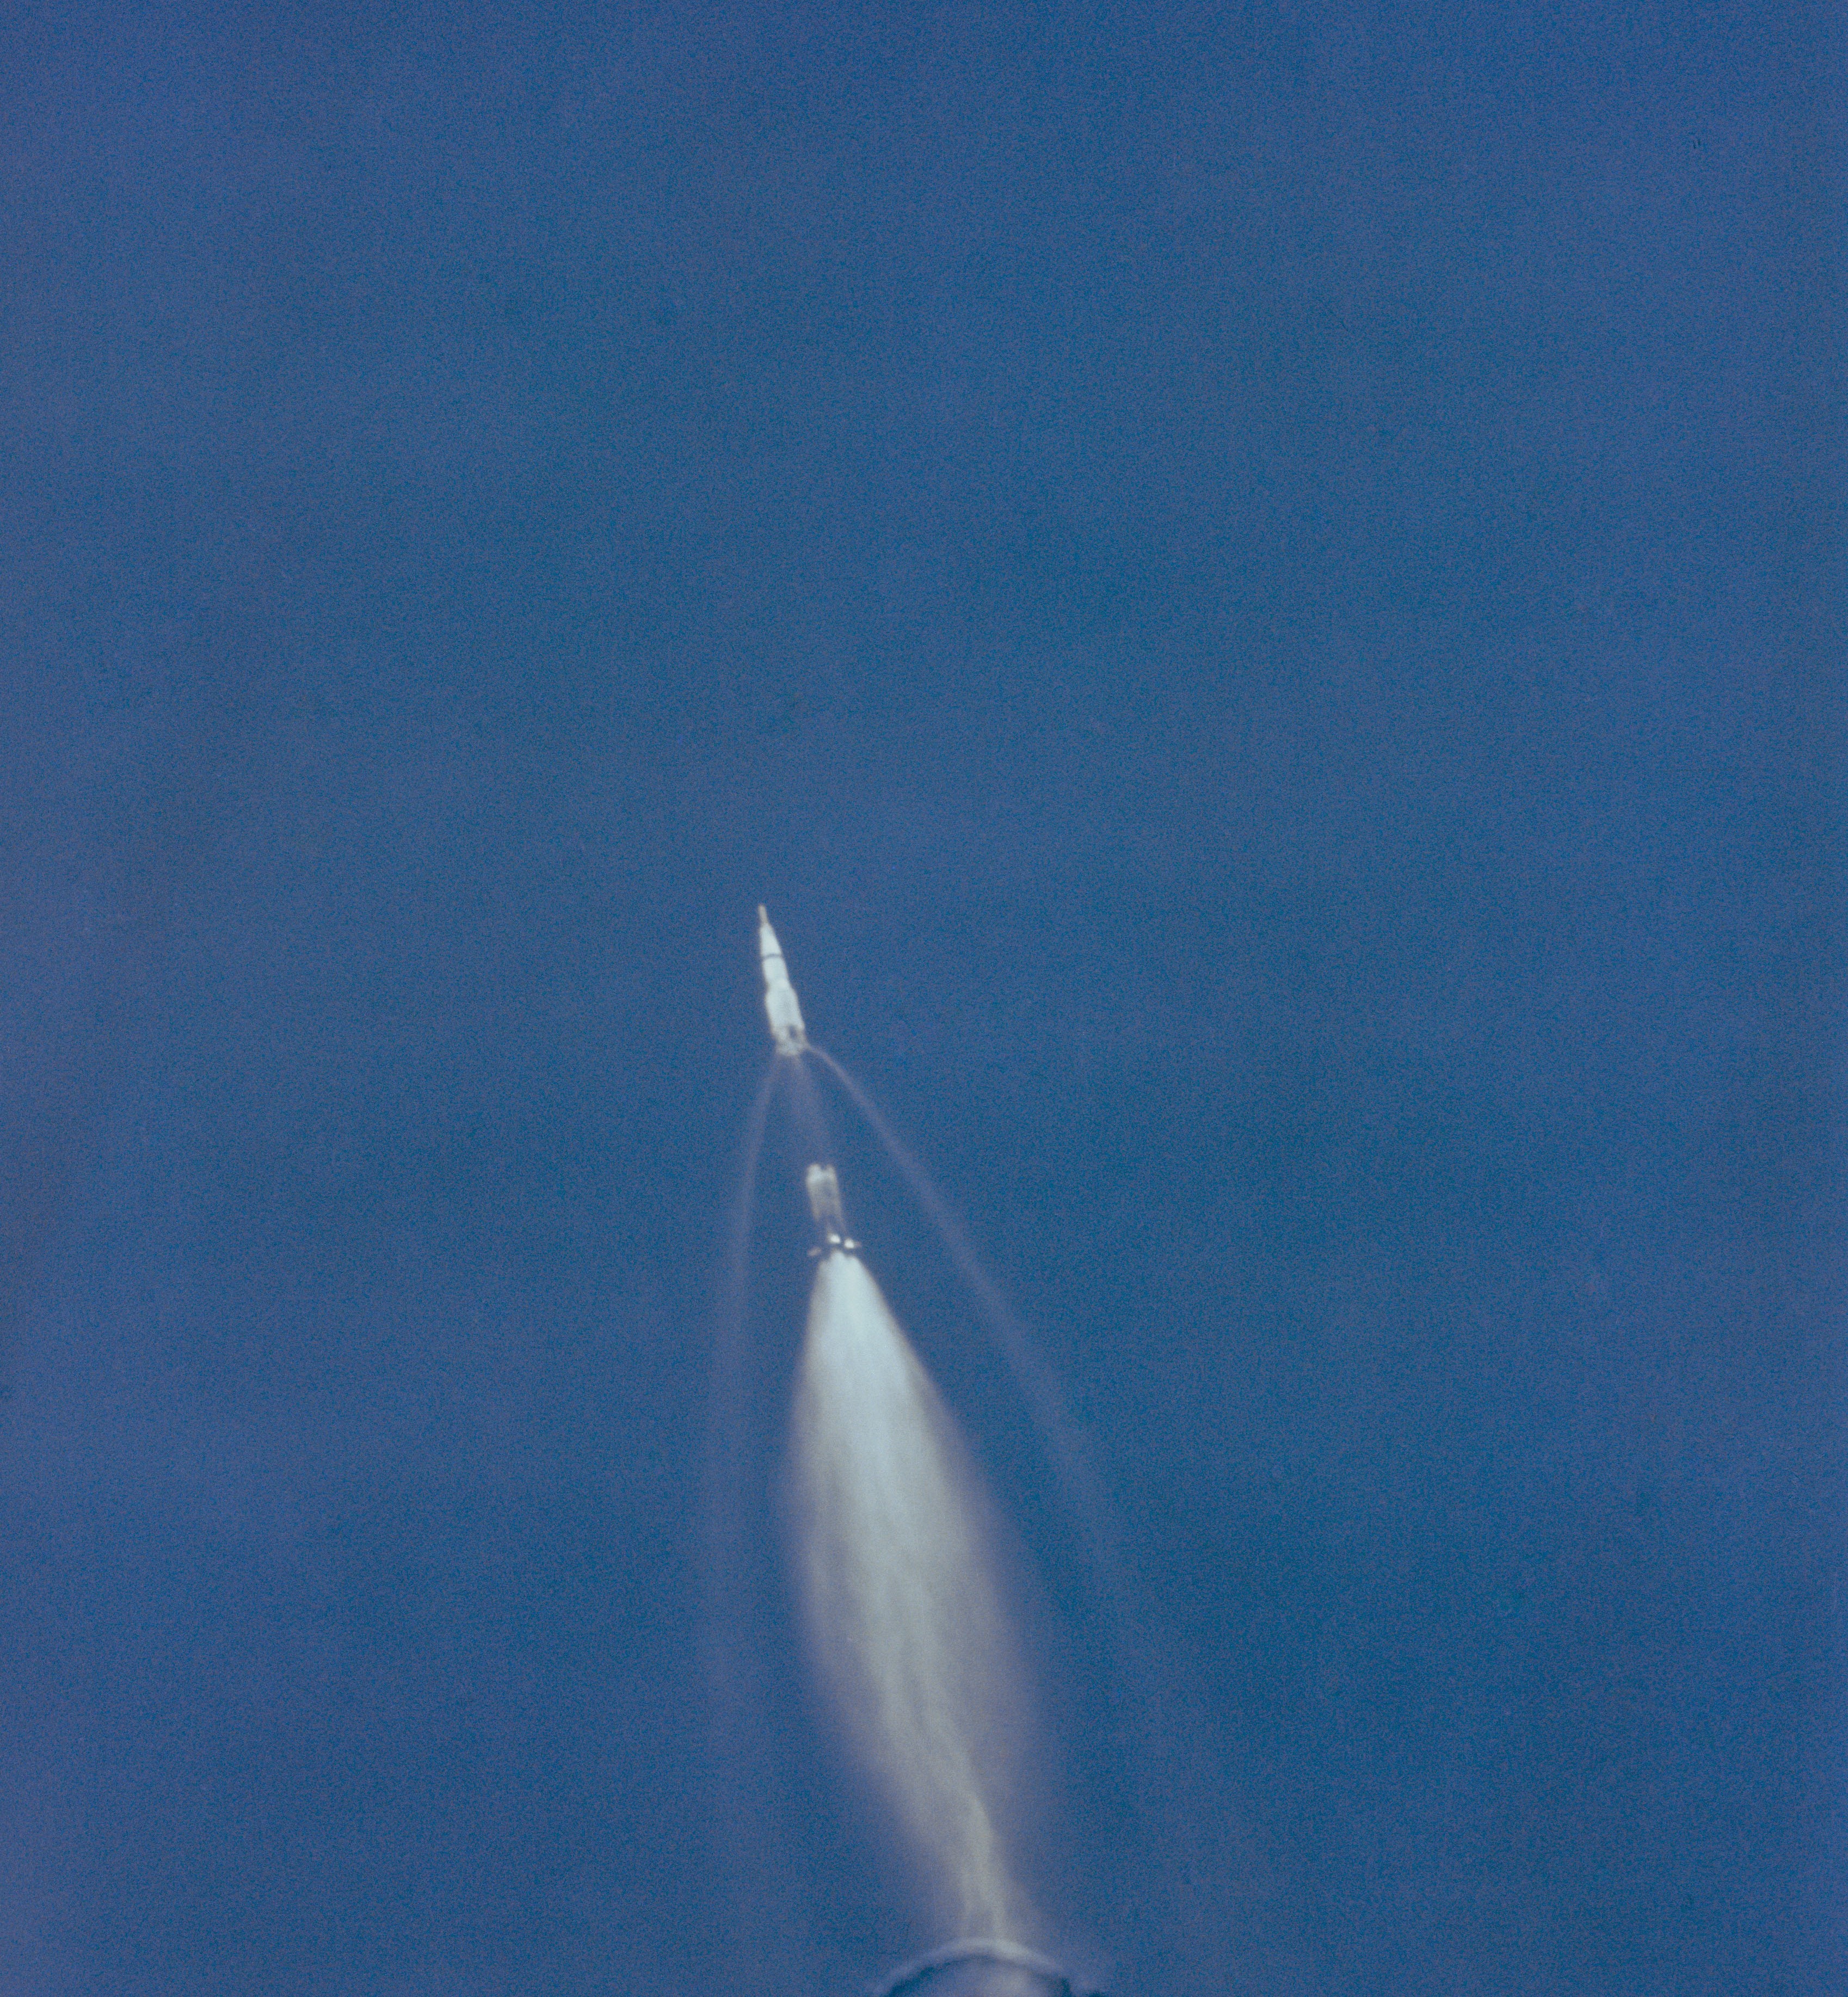 First stage separation for Apollo 11